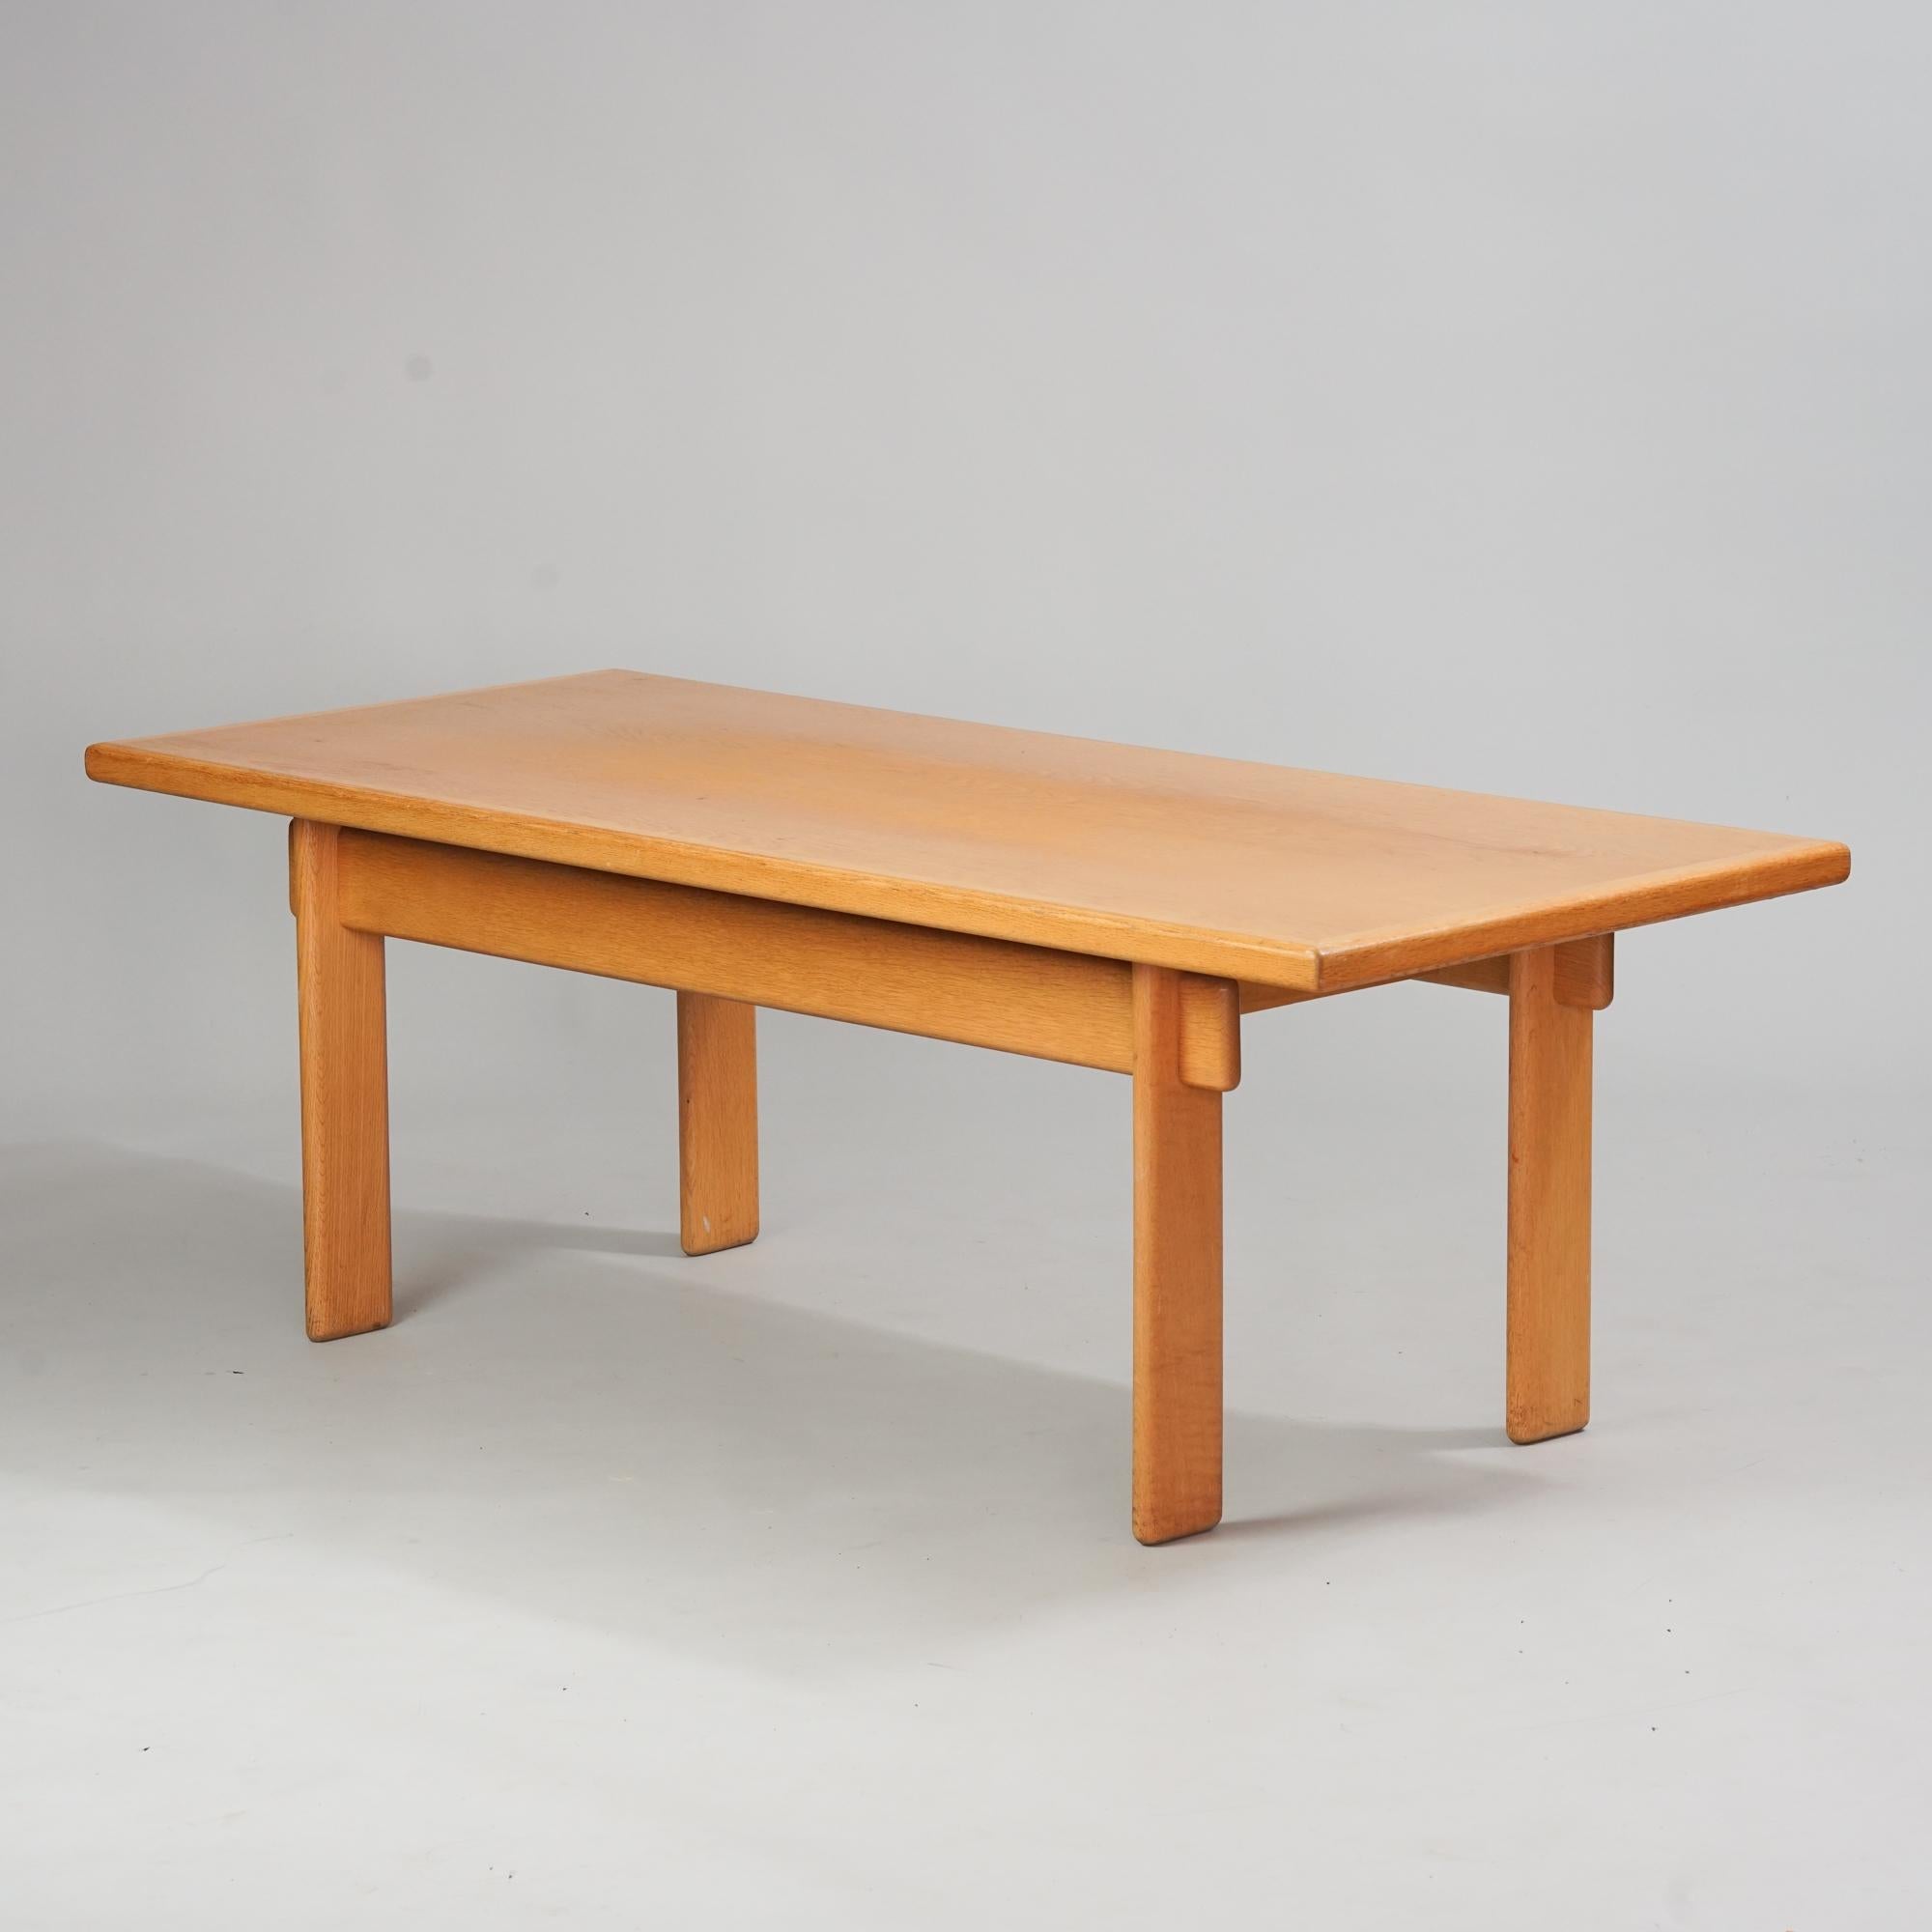 Rare Bonanza coffee table, designed by Esko Pajamies, manufactured by Asko, Mid-20th Century. Oak. Good vintage condition, minor patina consistent with age and use. Refinished. 

Esko Pajamies (1931-1990) graduated as an interior architect from the